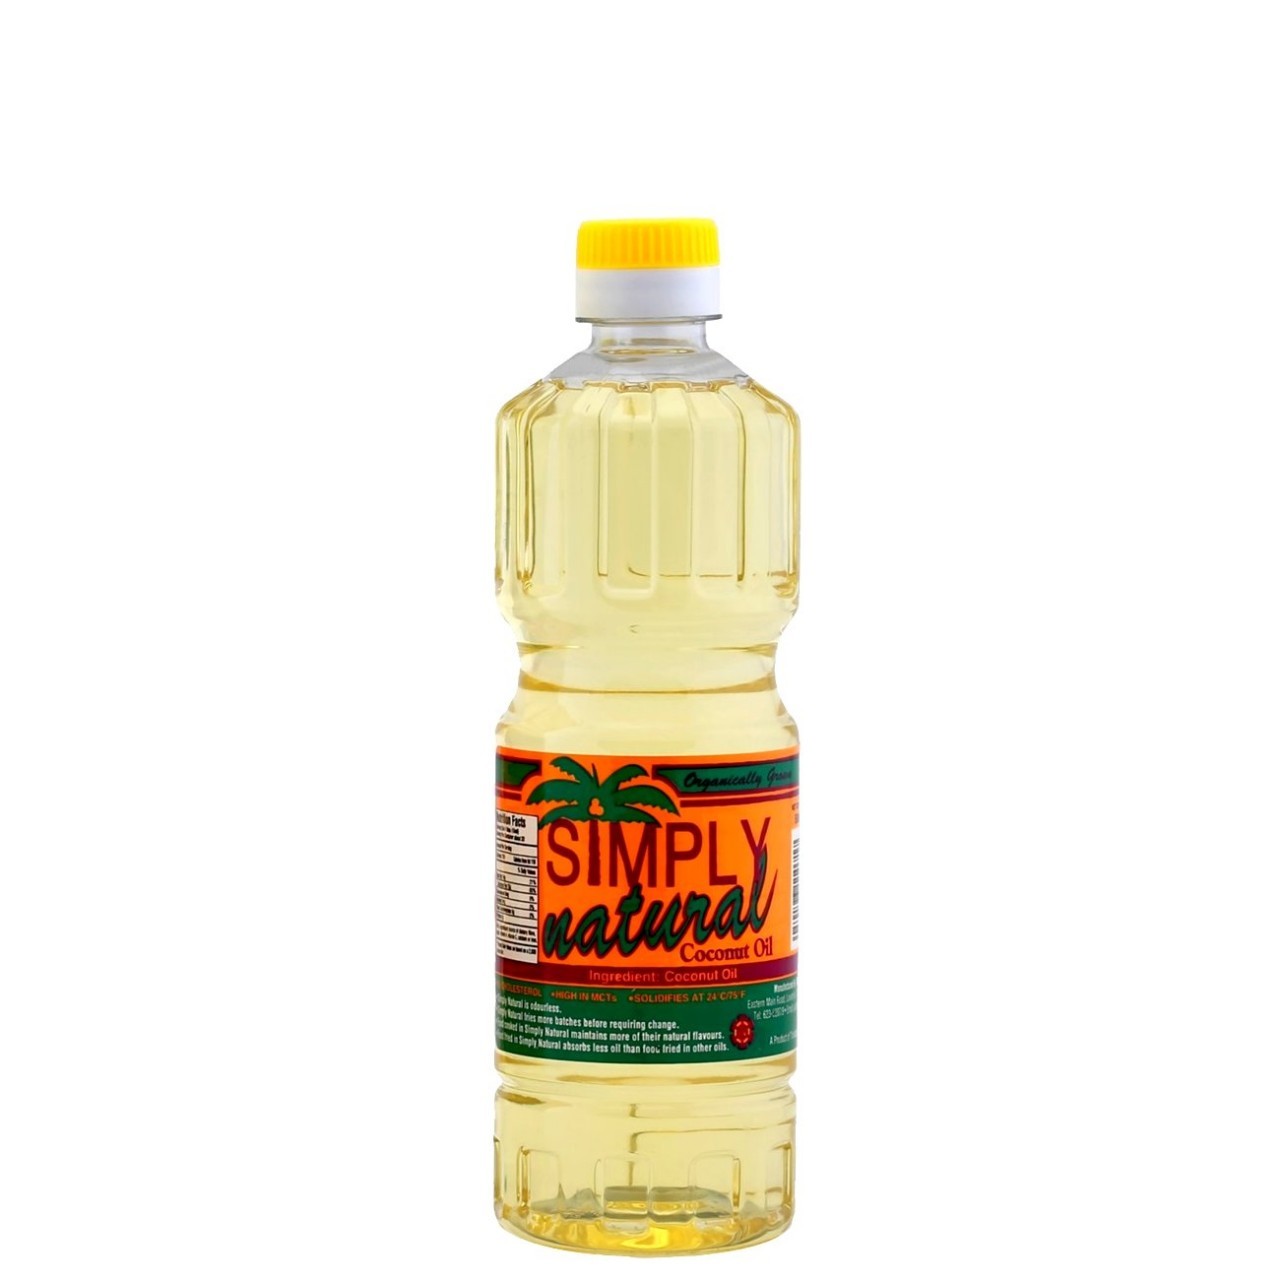 SIMPLY NATURAL COCONUT OIL 500ml